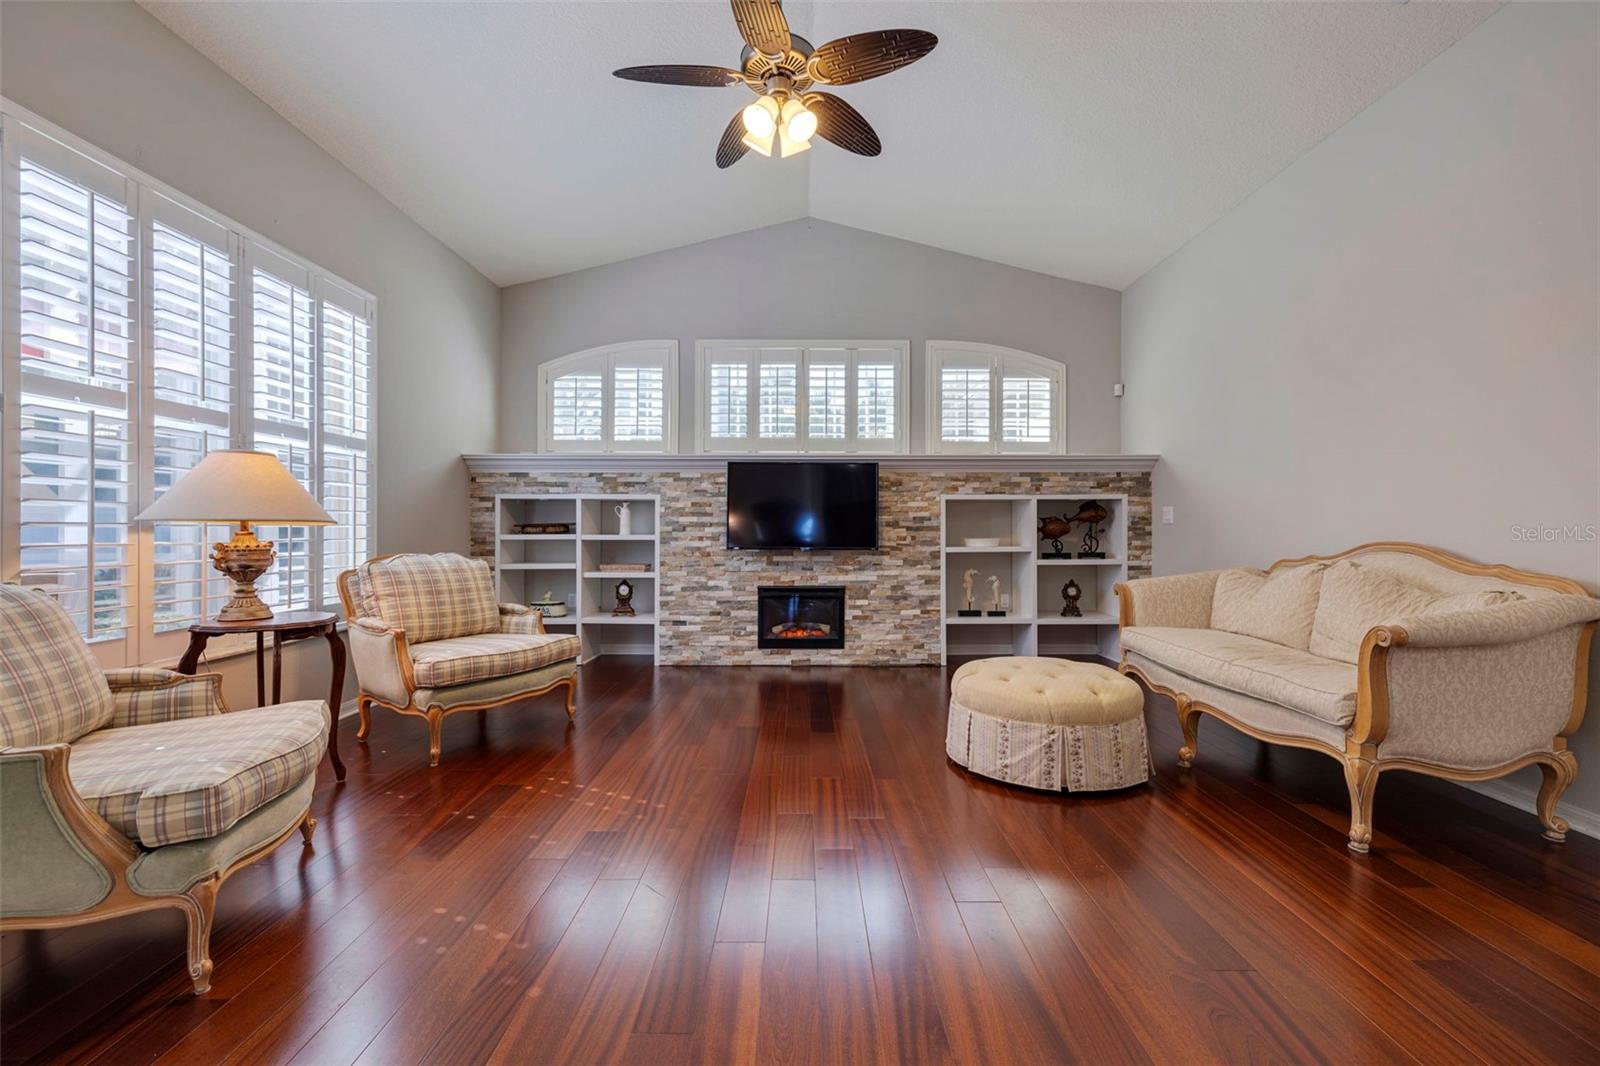 Living Area - Engineered Hardwood Flooring, Plantation Shutters, Stacked Stone Accent Wall, Ample Natural Lighting